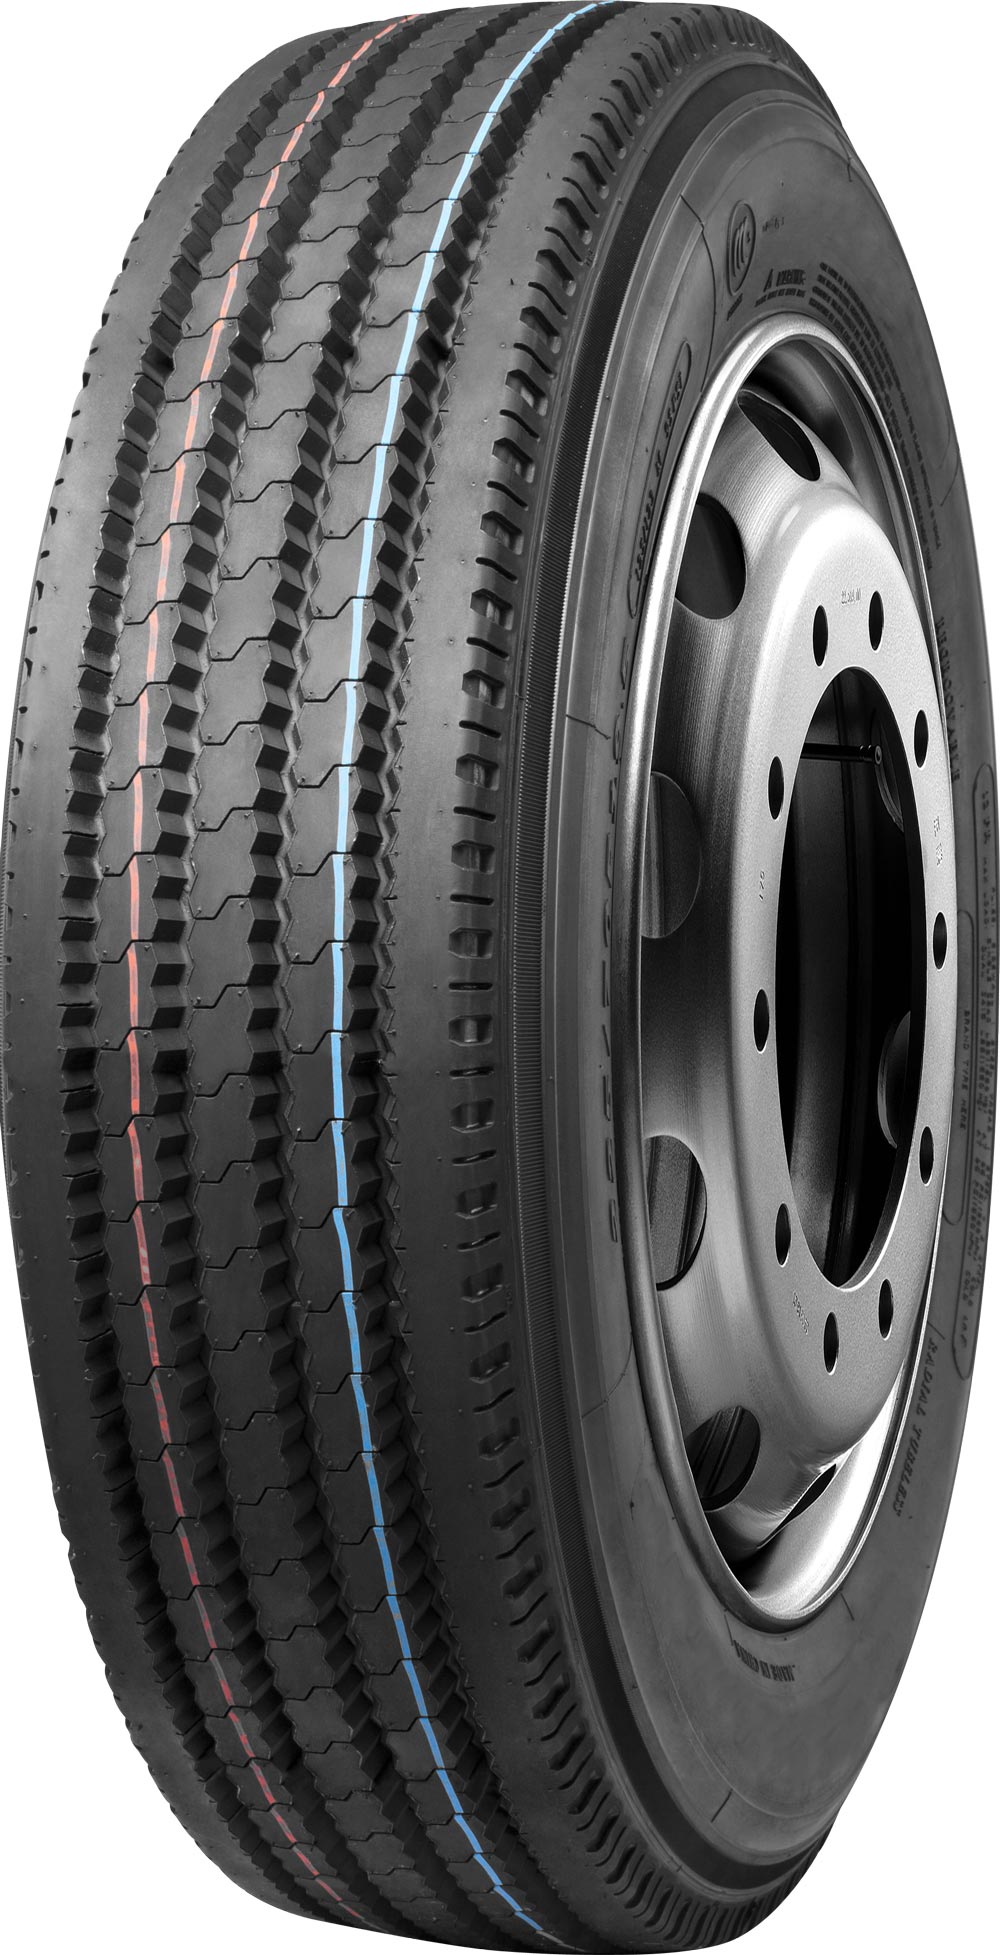 product_type-heavy_tires Barkley BL207 16 TL 265/70 R19.5 140M